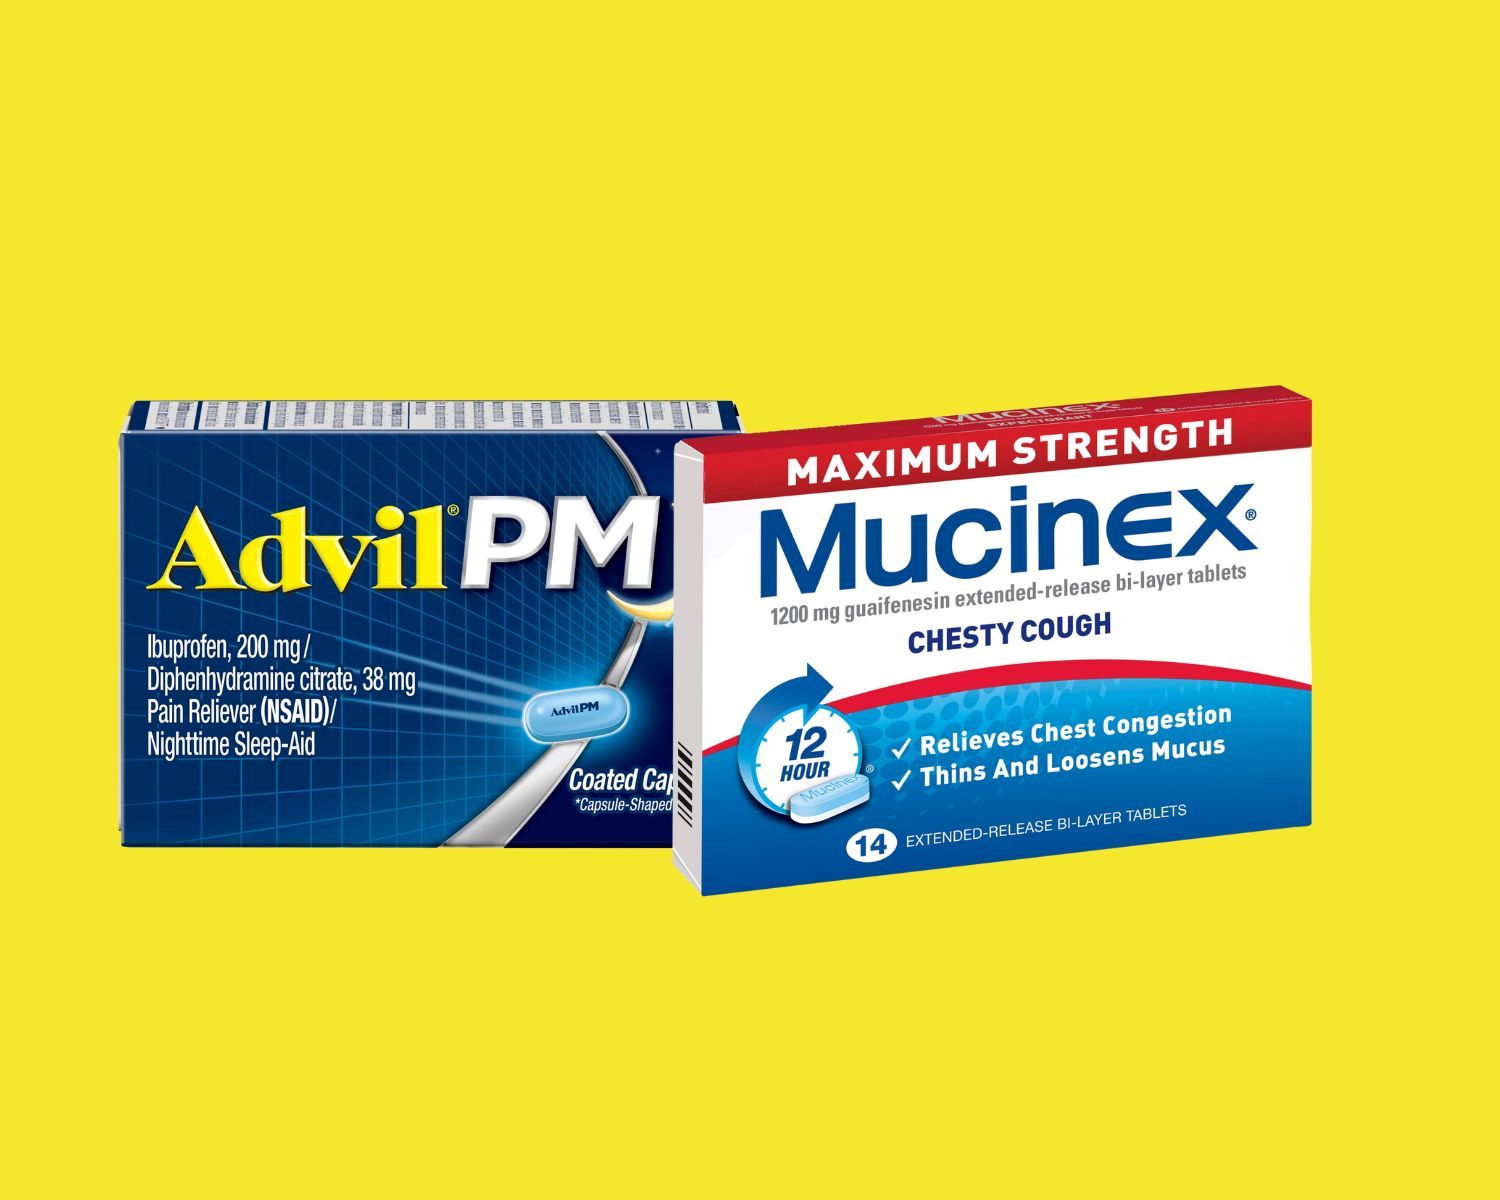 The Ultimate Cold And Pain Relief Combo: Mucinex And Advil PM - A Match Made In Medicine Heaven!